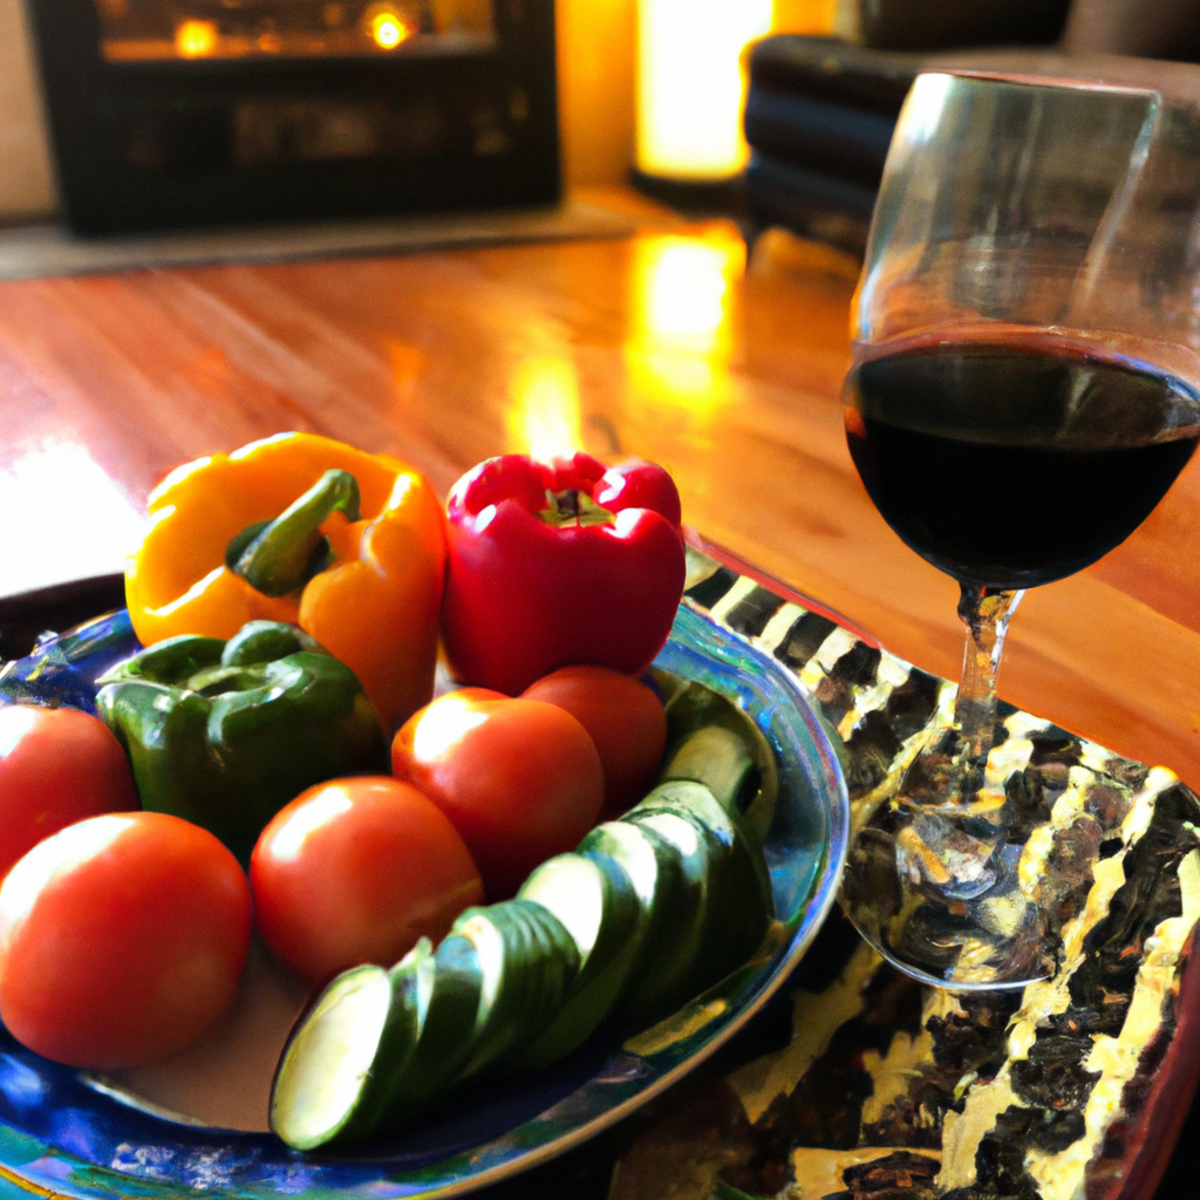 The photo features a wooden table with a plate of colorful vegetables, including tomatoes, cucumbers, and bell peppers, arranged in a visually appealing manner. A glass of red wine sits beside the plate, adding a touch of elegance to the scene. In the background, a pair of running shoes and a yoga mat are visible, emphasizing the importance of exercise in maintaining a healthy lifestyle. The natural lighting and vibrant colors of the vegetables create a warm and inviting atmosphere, encouraging readers to adopt the Mediterranean diet and exercise routine.